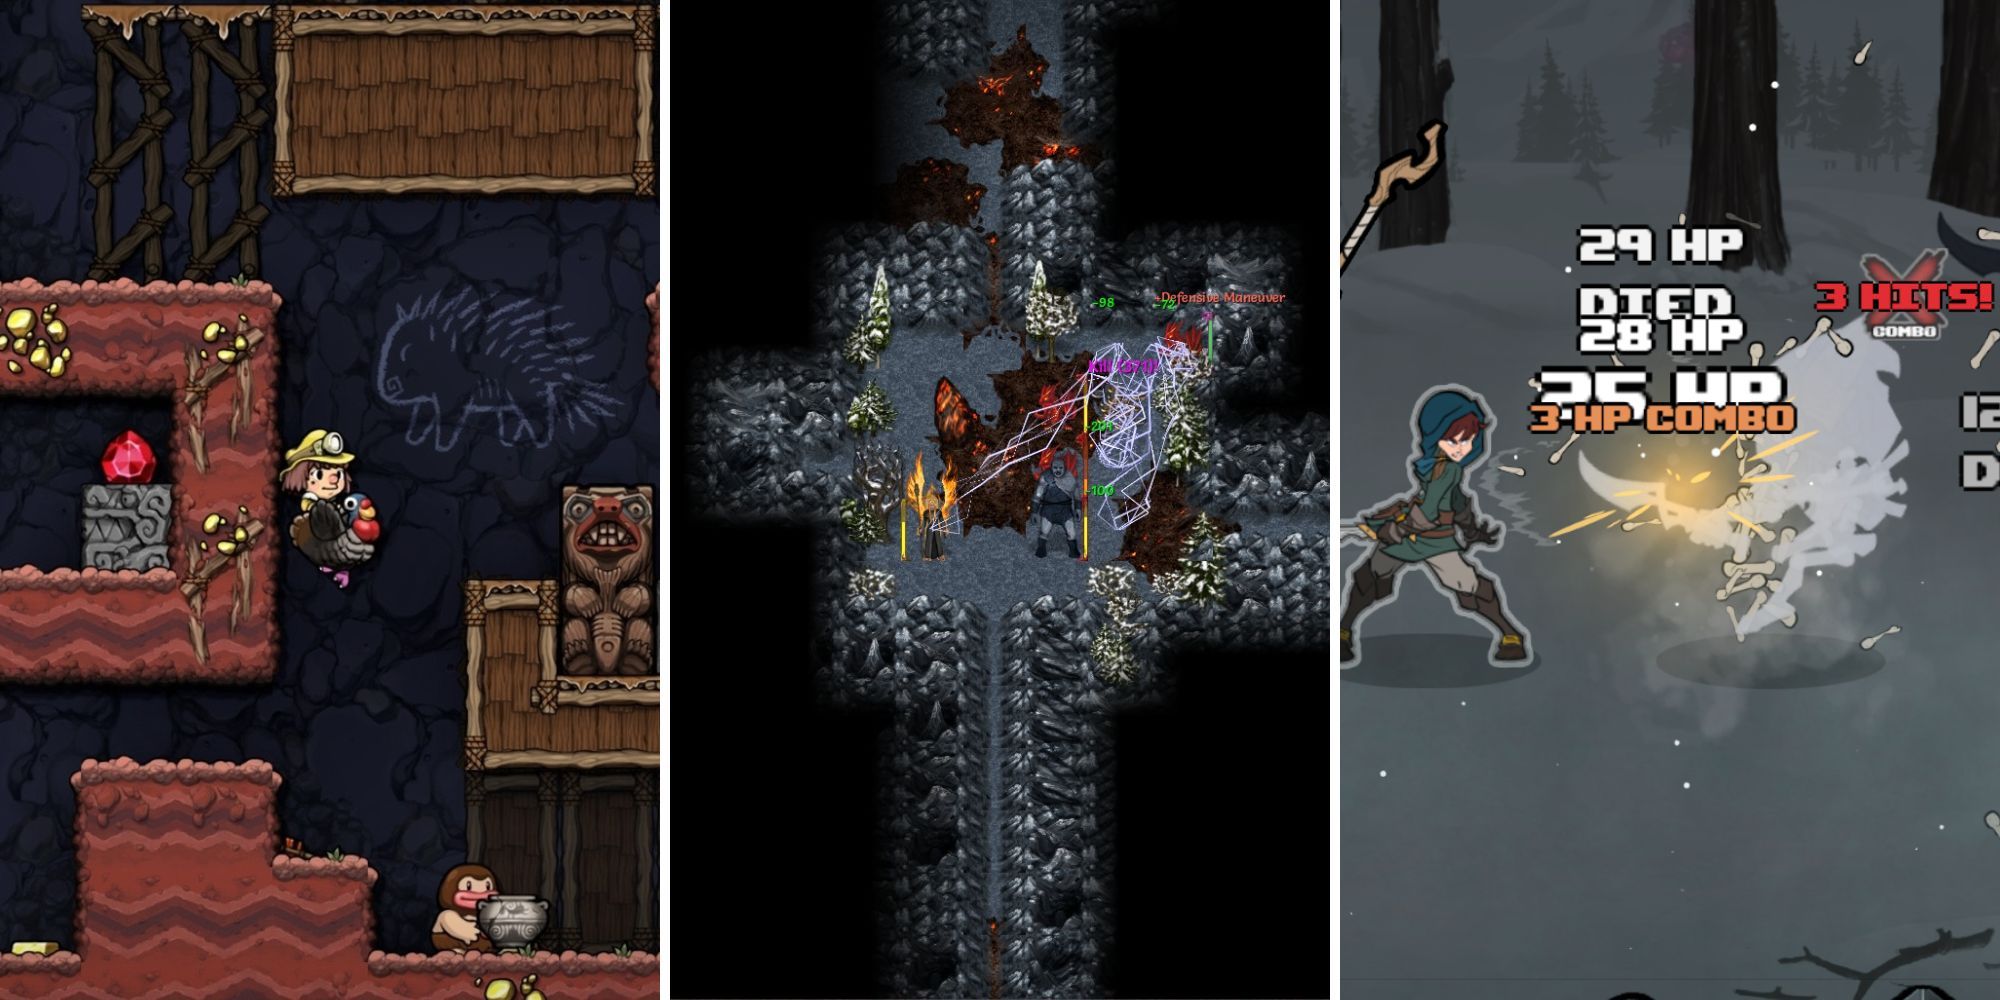 A grid of images shwoing the longest roguelike games including Spelunky 2, Tales Of Maj'Eyal, and Has-Been Heroes 